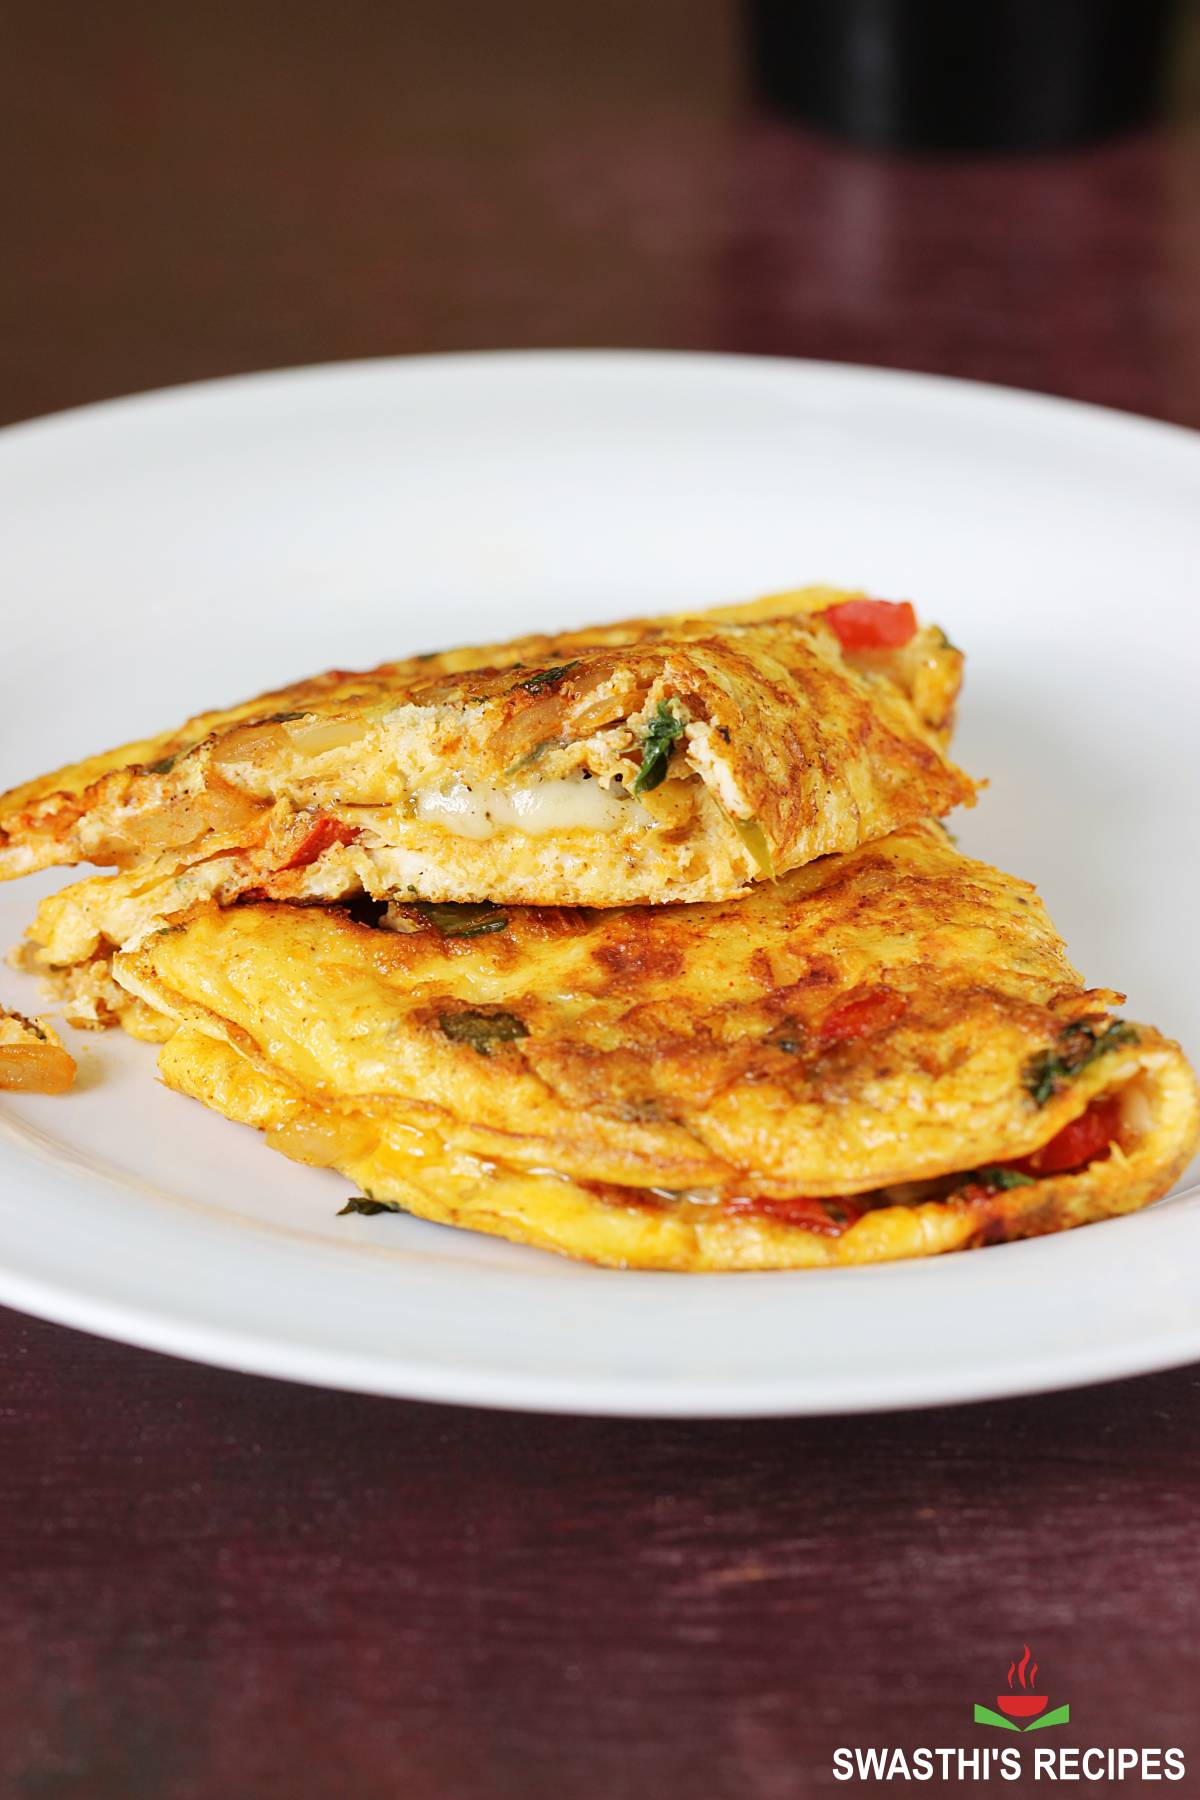 https://www.indianhealthyrecipes.com/wp-content/uploads/2021/06/cheese-omelette.jpg